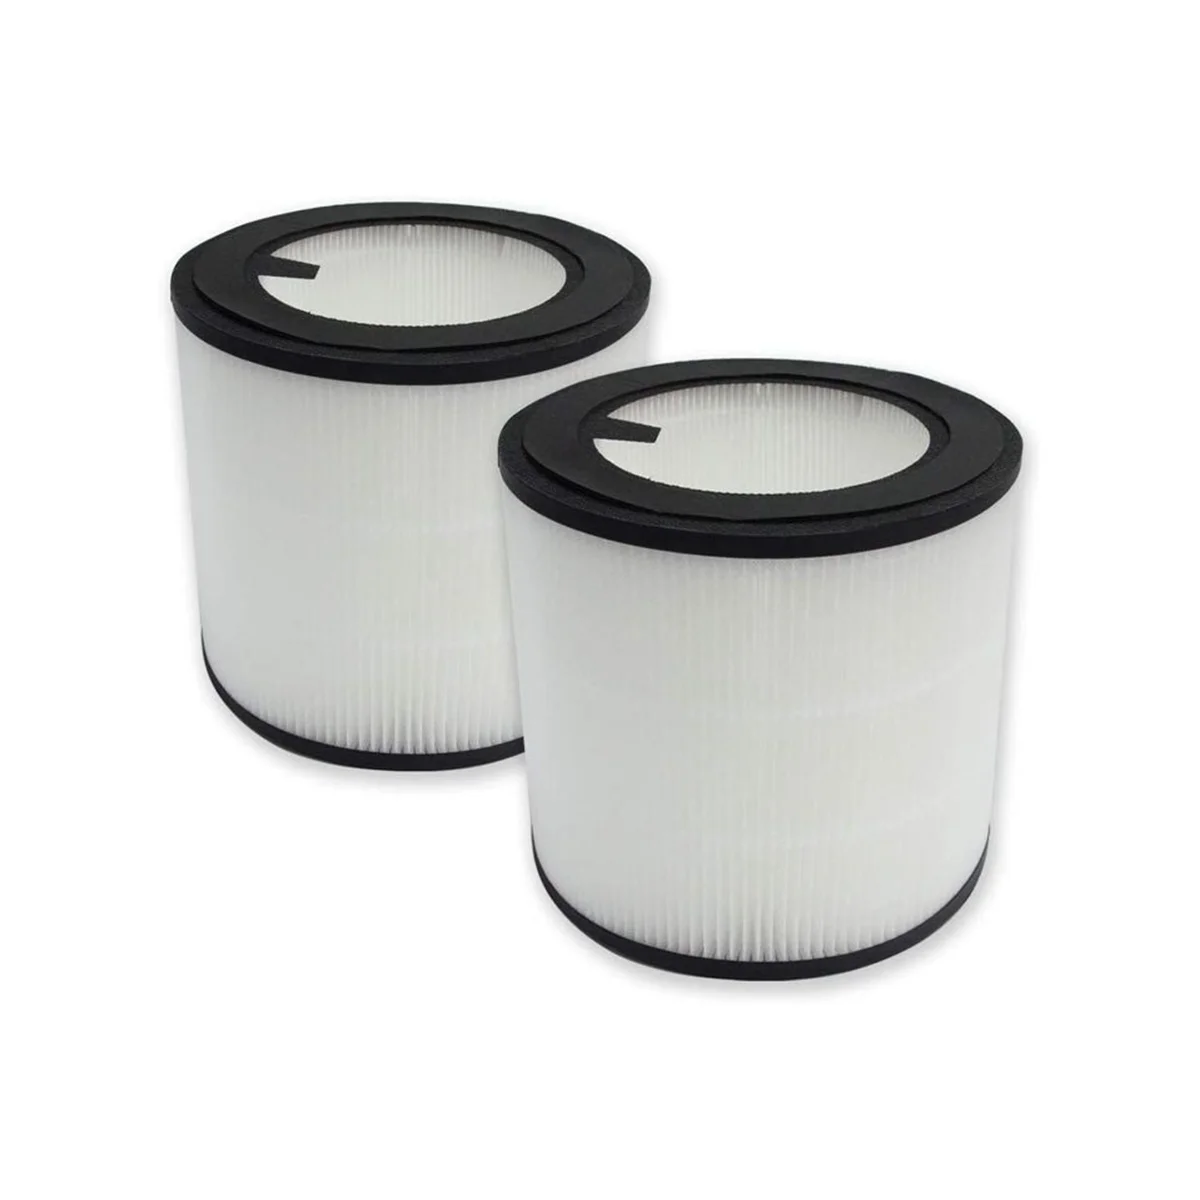 

2Pcs Filter for Philips FY0293/30/AC0820/AC0830/ACO819/AC0820/AC0830 Air Purifier Filter Professional Replacement Part